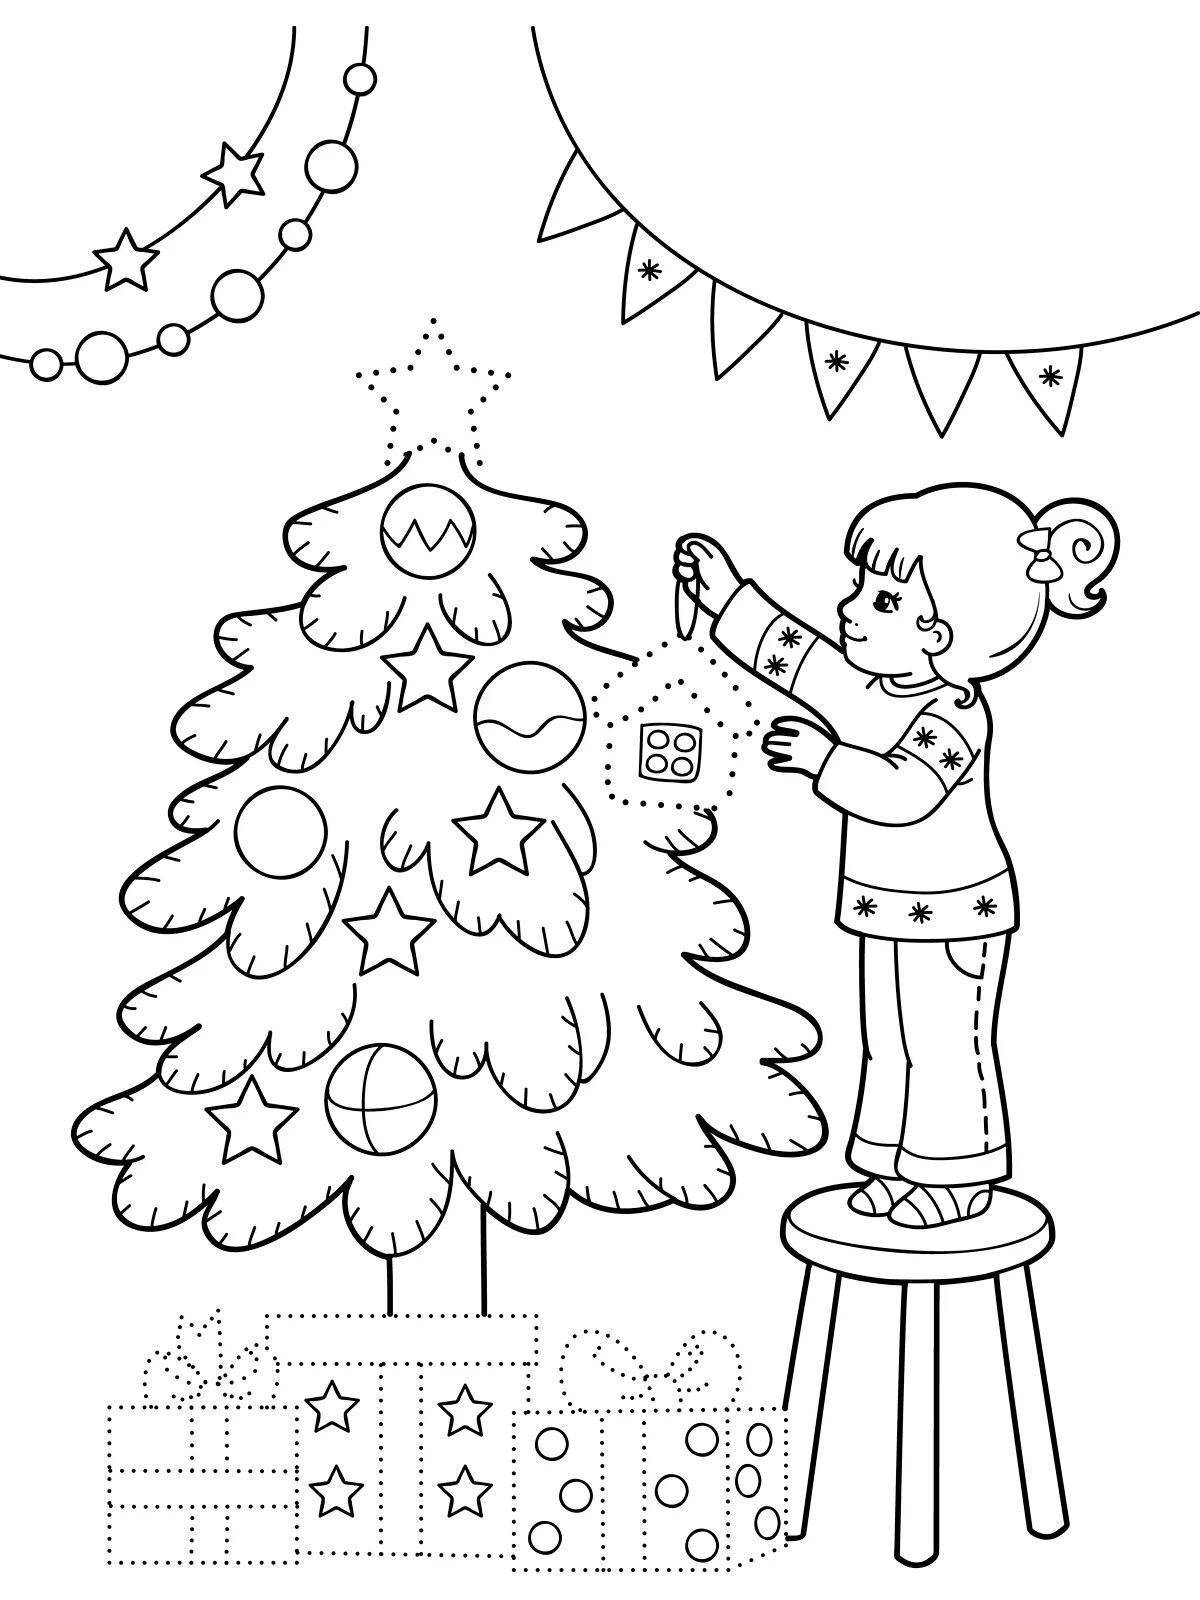 Dazzling tree coloring book for girls